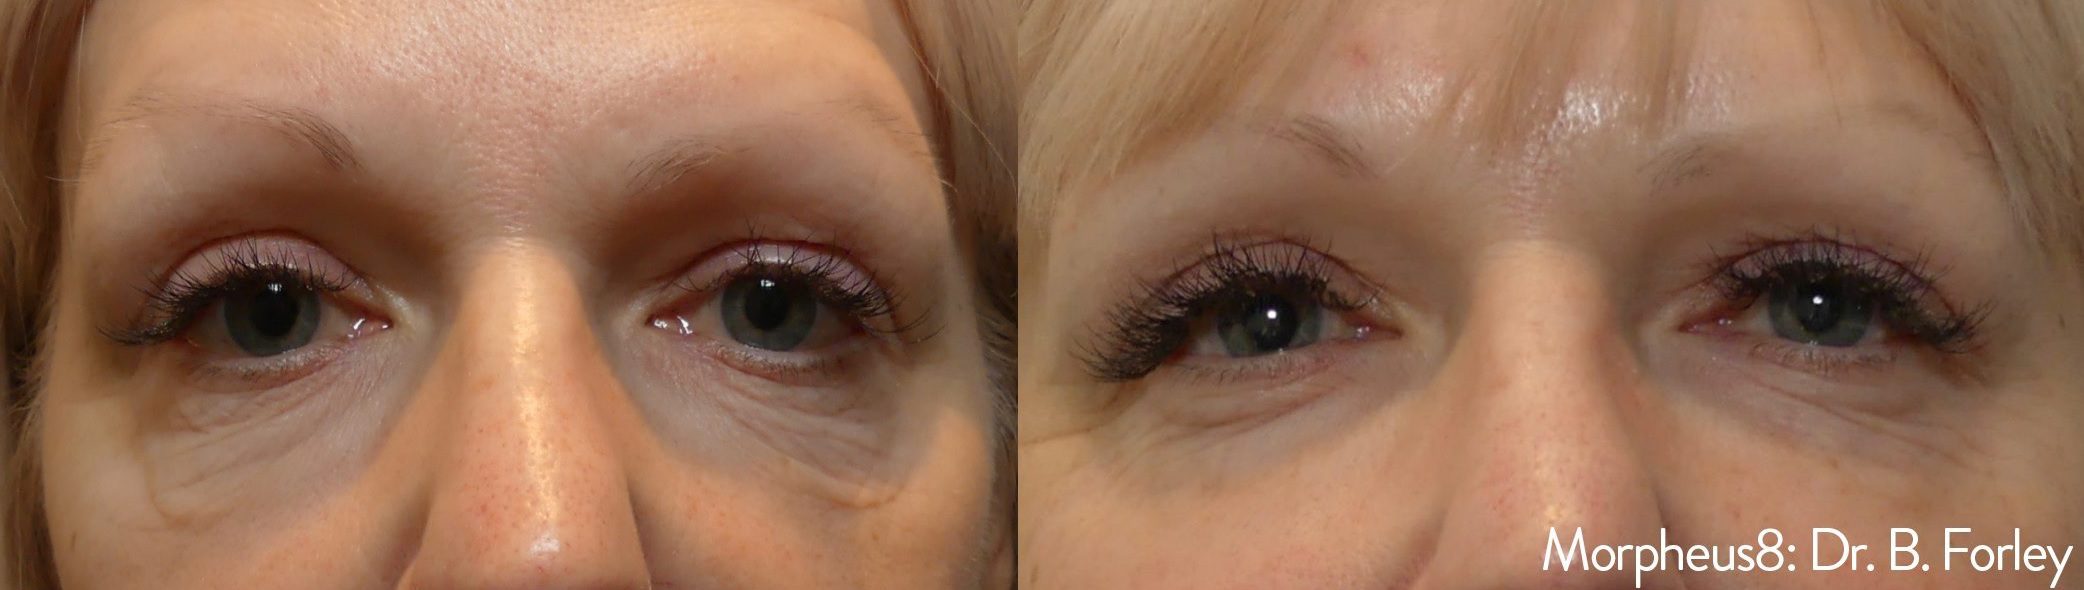 Morpheus8 eye wrinkles bags under eyes before and after